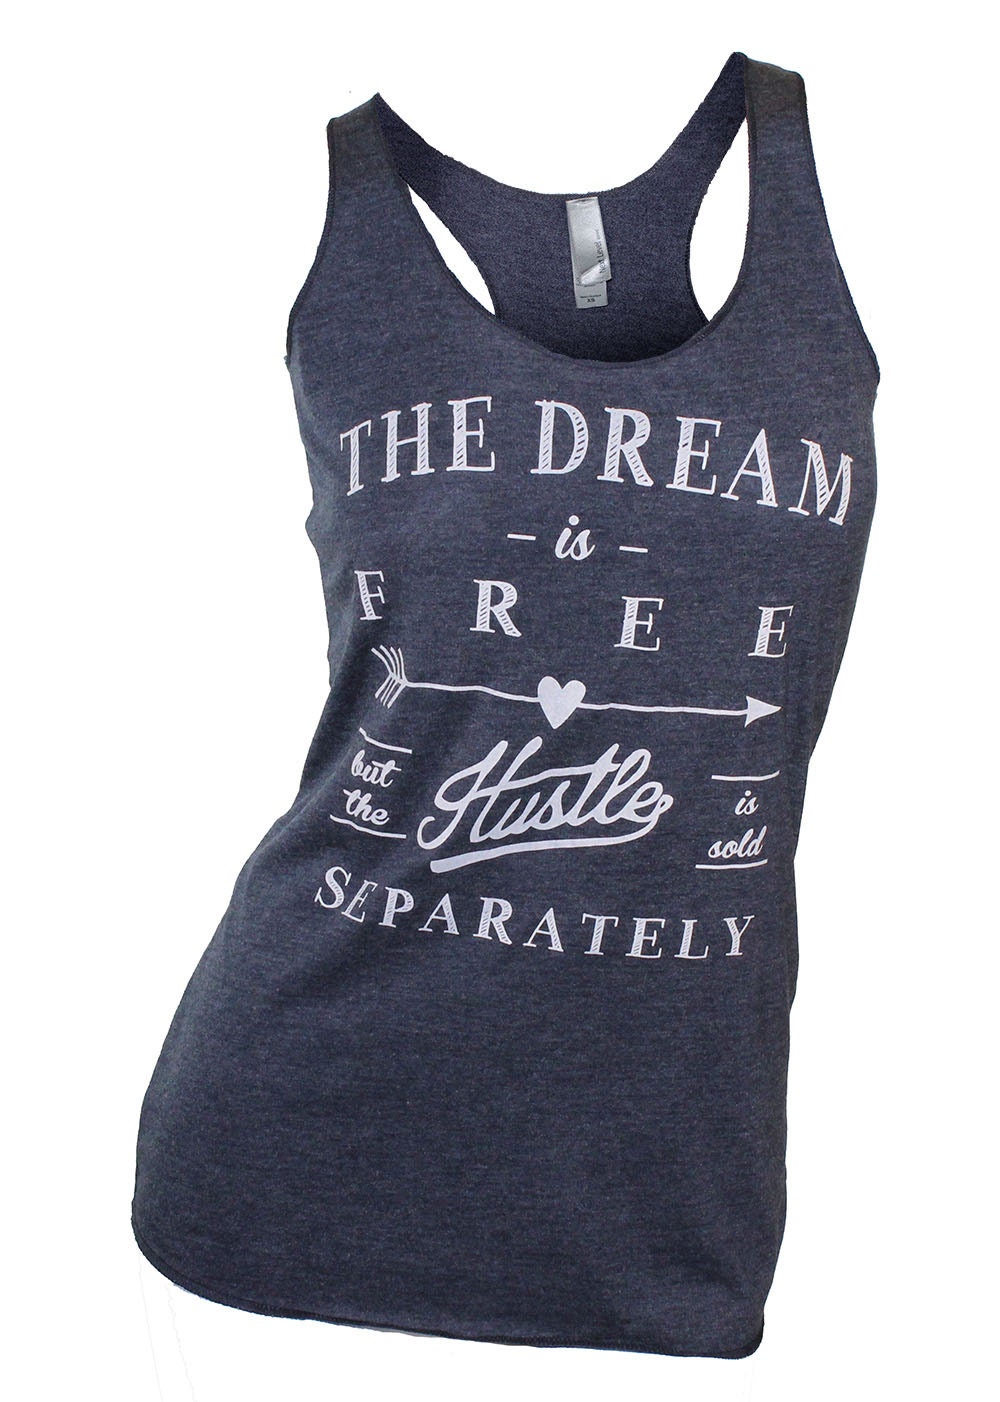 graphic tees for women. women's tank top. gym tank top.